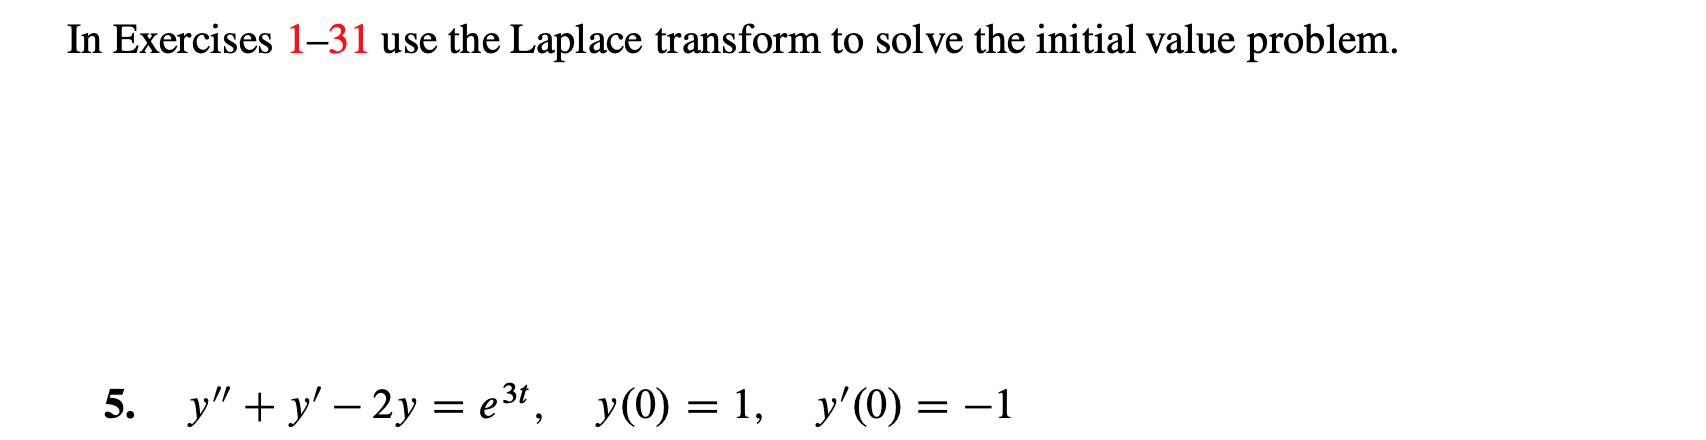 In Exercises 1-31 use the Laplace transform to solve the initial value problem.
5. yy2y e3, y(0) = 1, y'(0)-1
_
